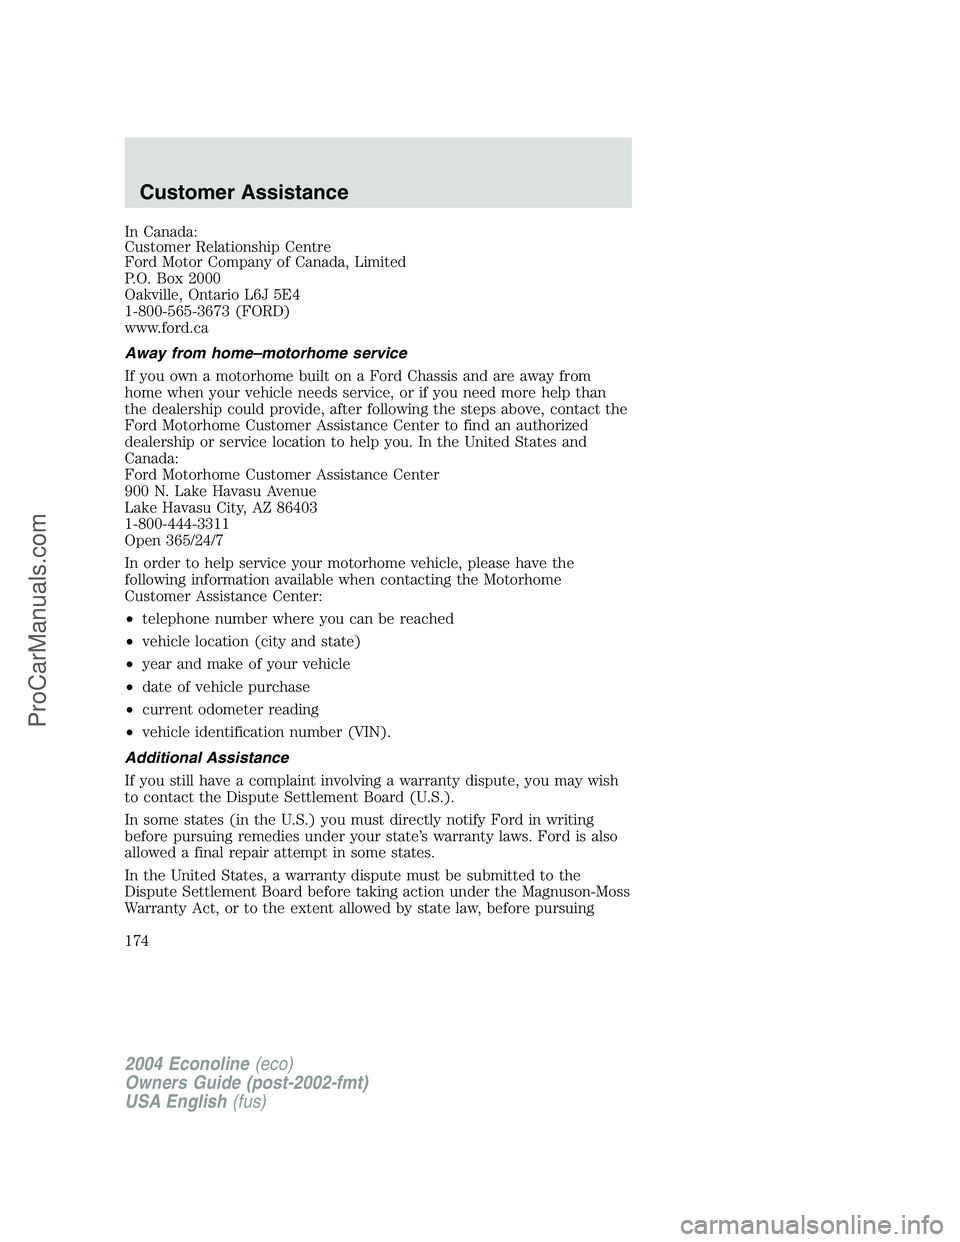 FORD E-250 2004  Owners Manual In Canada:
Customer Relationship Centre
Ford Motor Company of Canada, Limited
P.O. Box 2000
Oakville, Ontario L6J 5E4
1-800-565-3673 (FORD)
www.ford.ca
Away from home–motorhome service
If you own a 